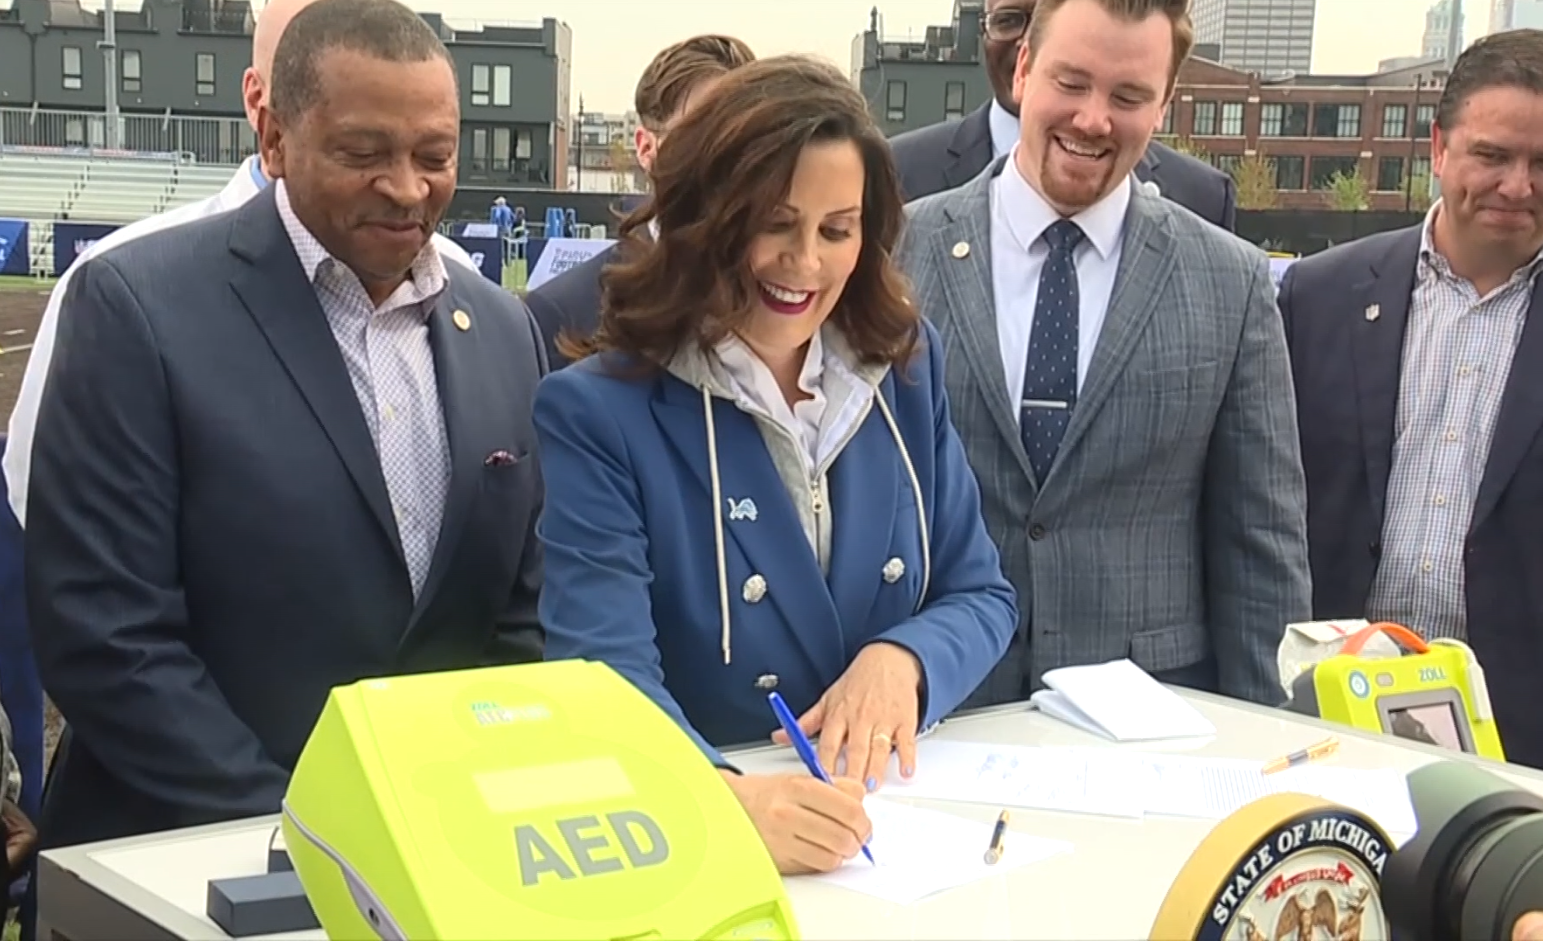 Governor Whitmer signs bipartisan CPR and AED training bills into law